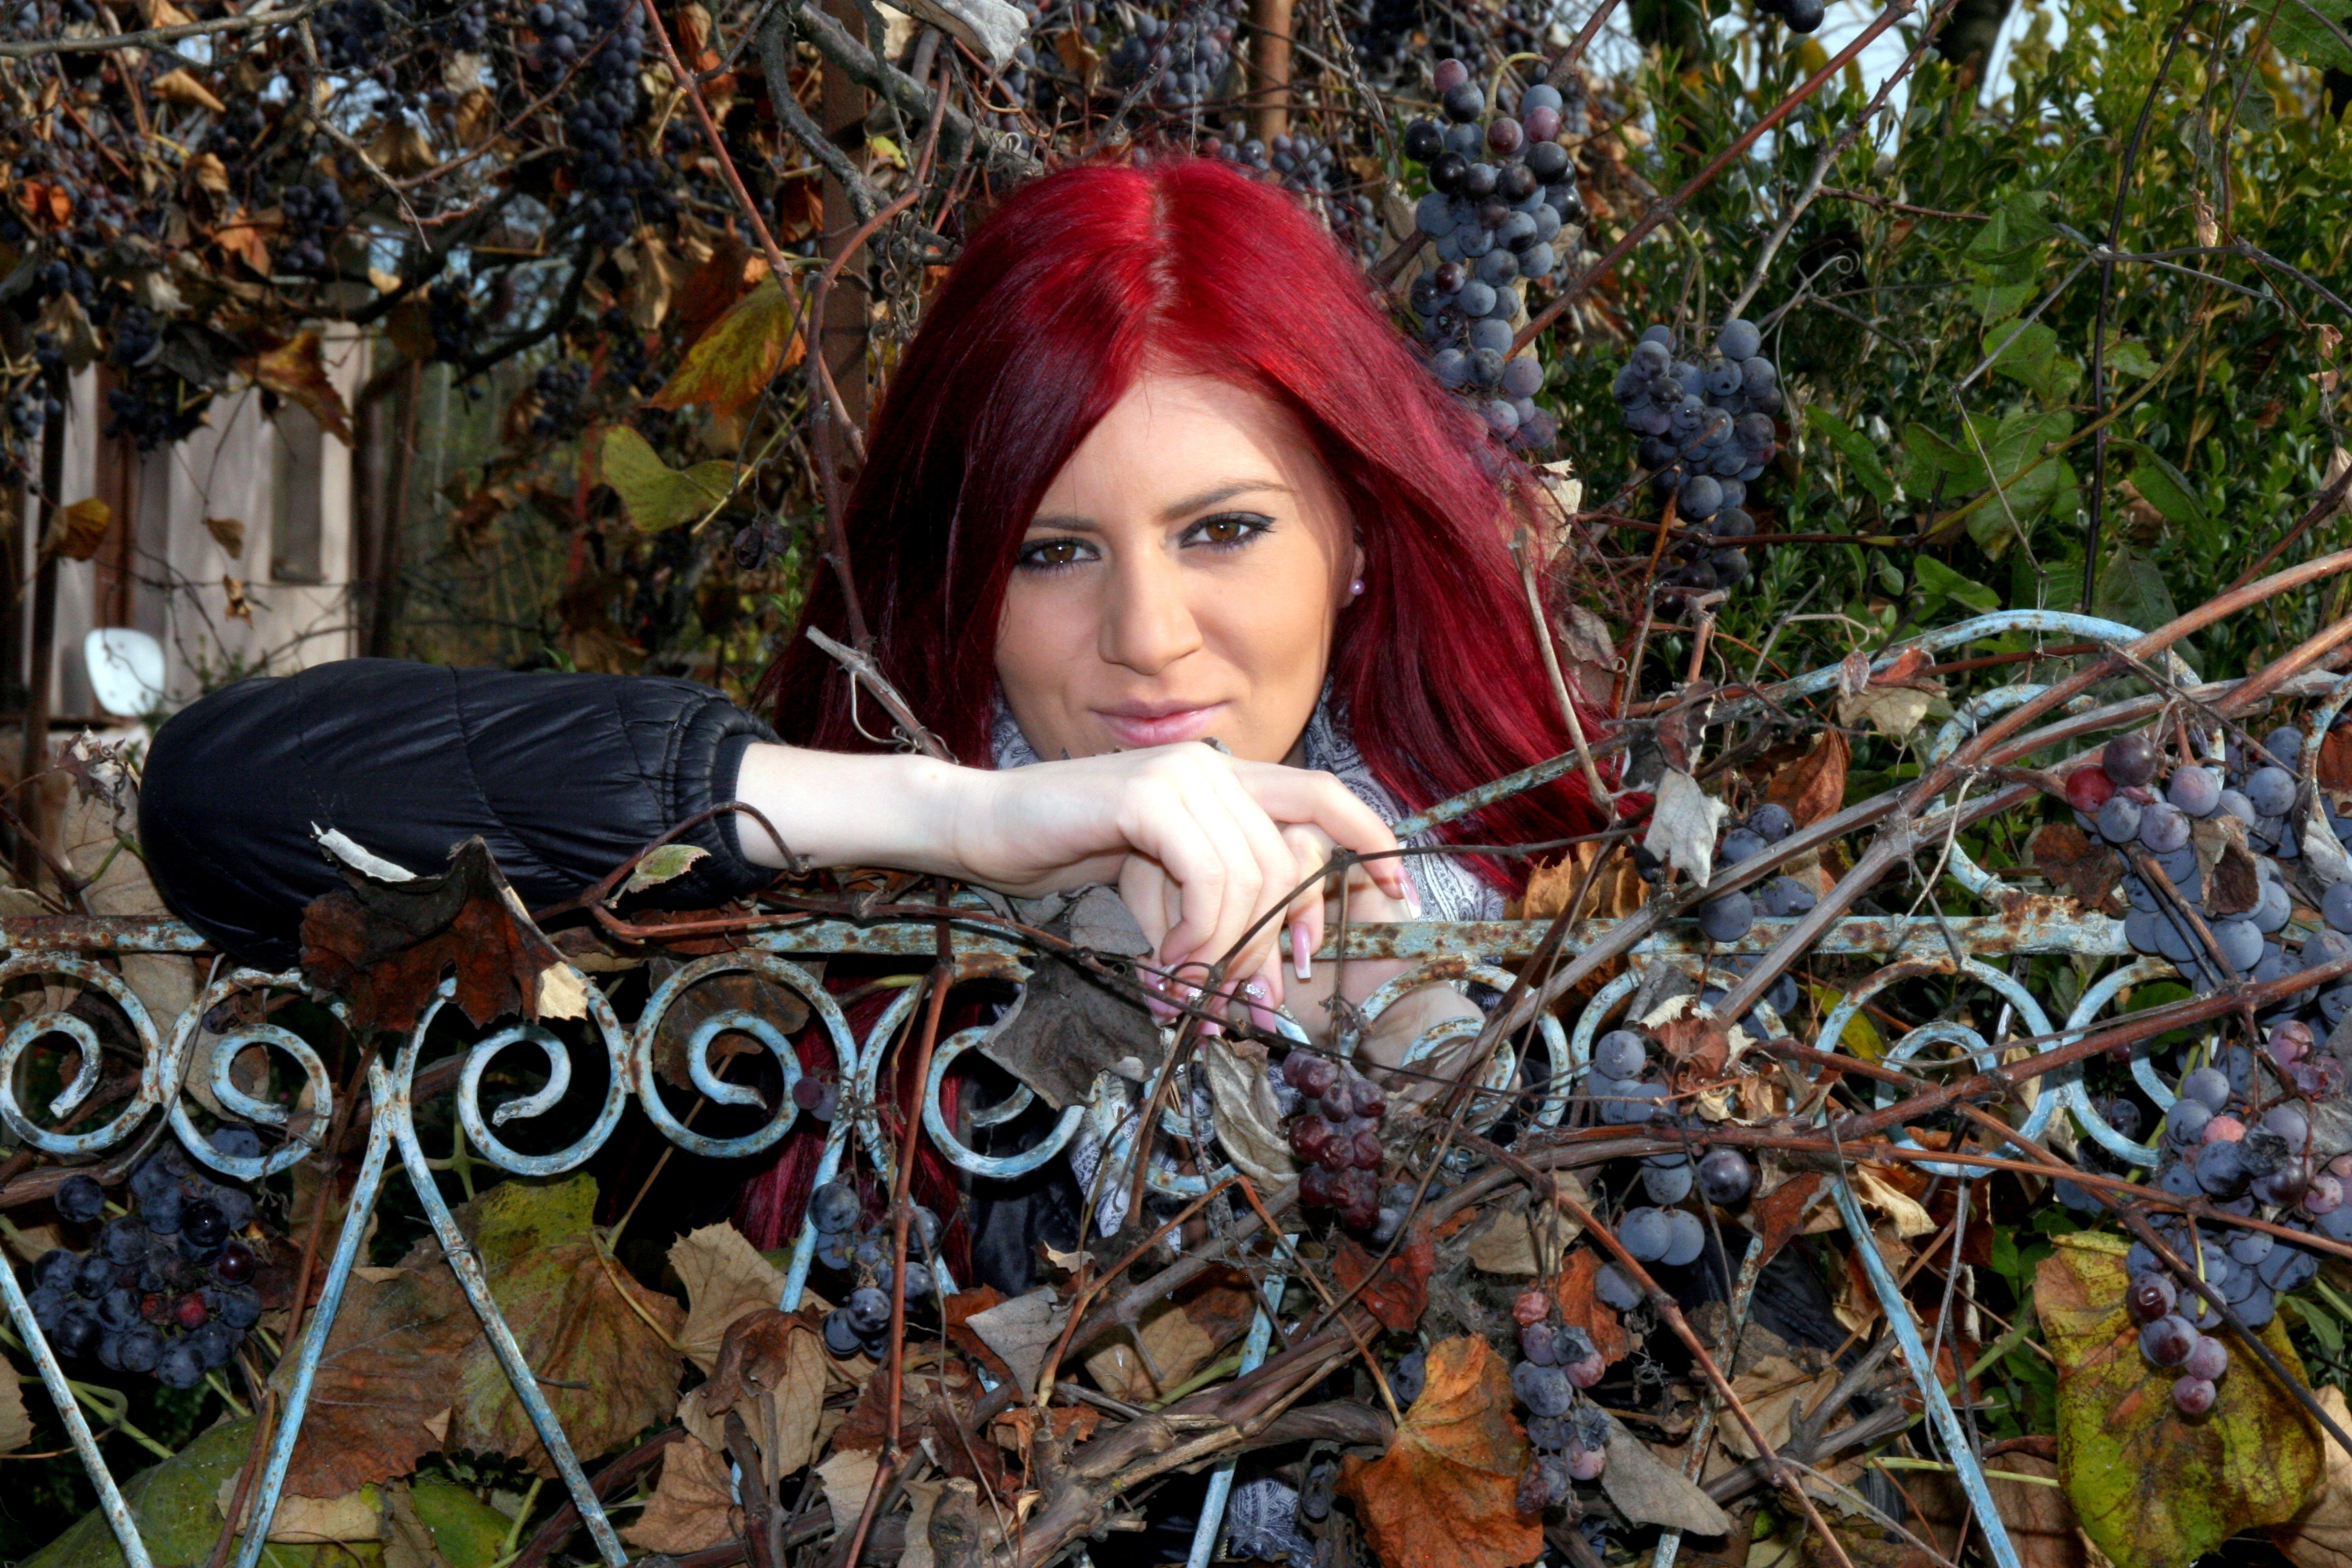 red haired woman leaning on steel fence with grape vines